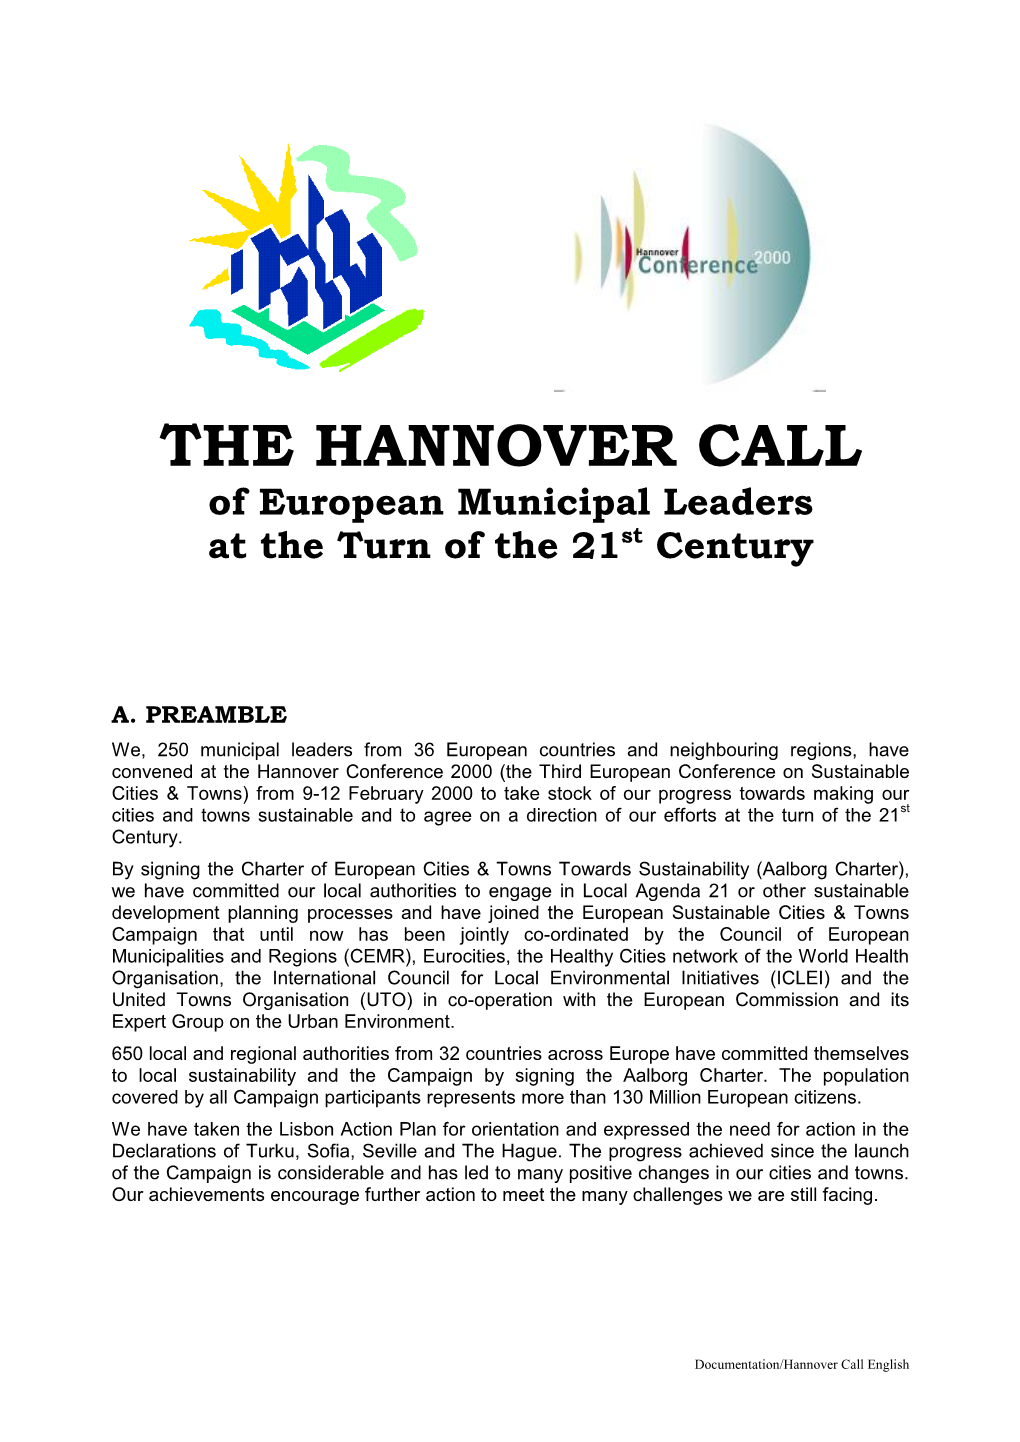 THE HANNOVER CALL of European Municipal Leaders at the Turn of the 21St Century